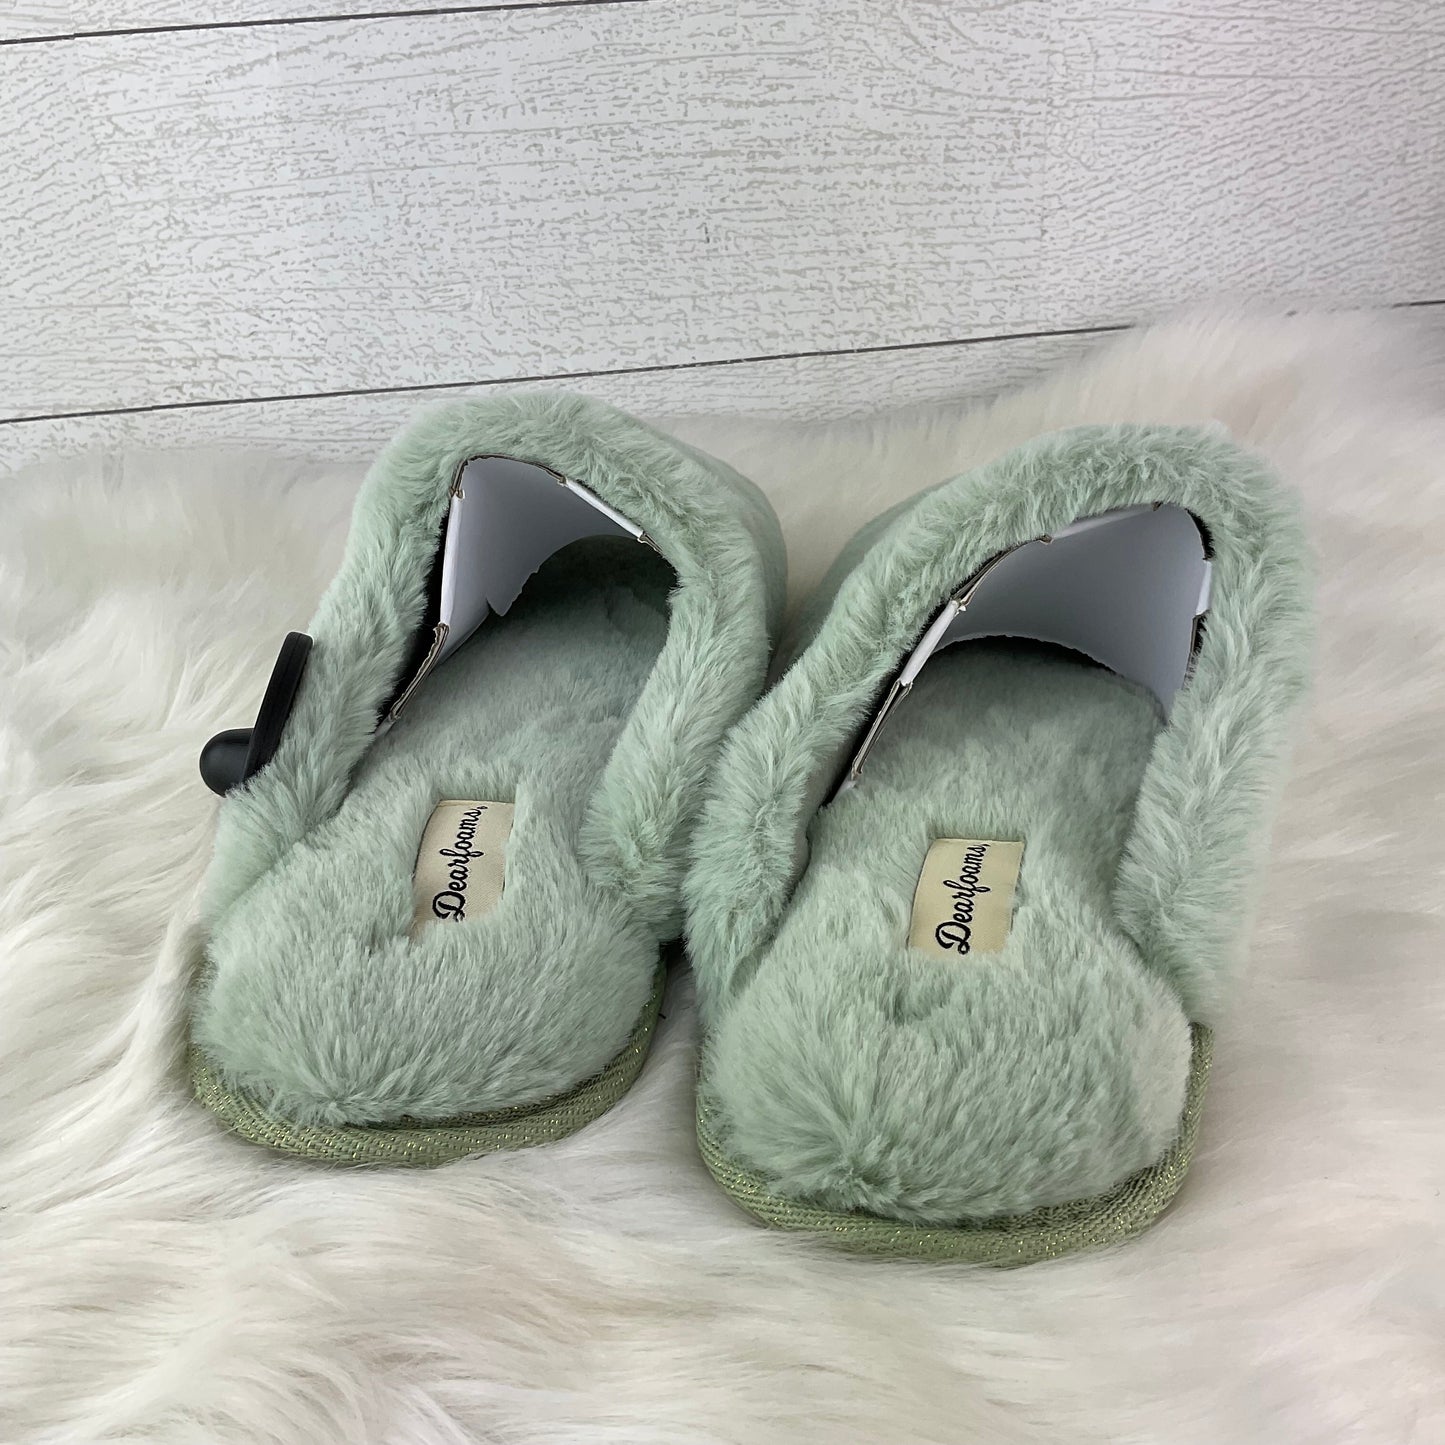 Green Slippers Clothes Mentor, Size 11.5